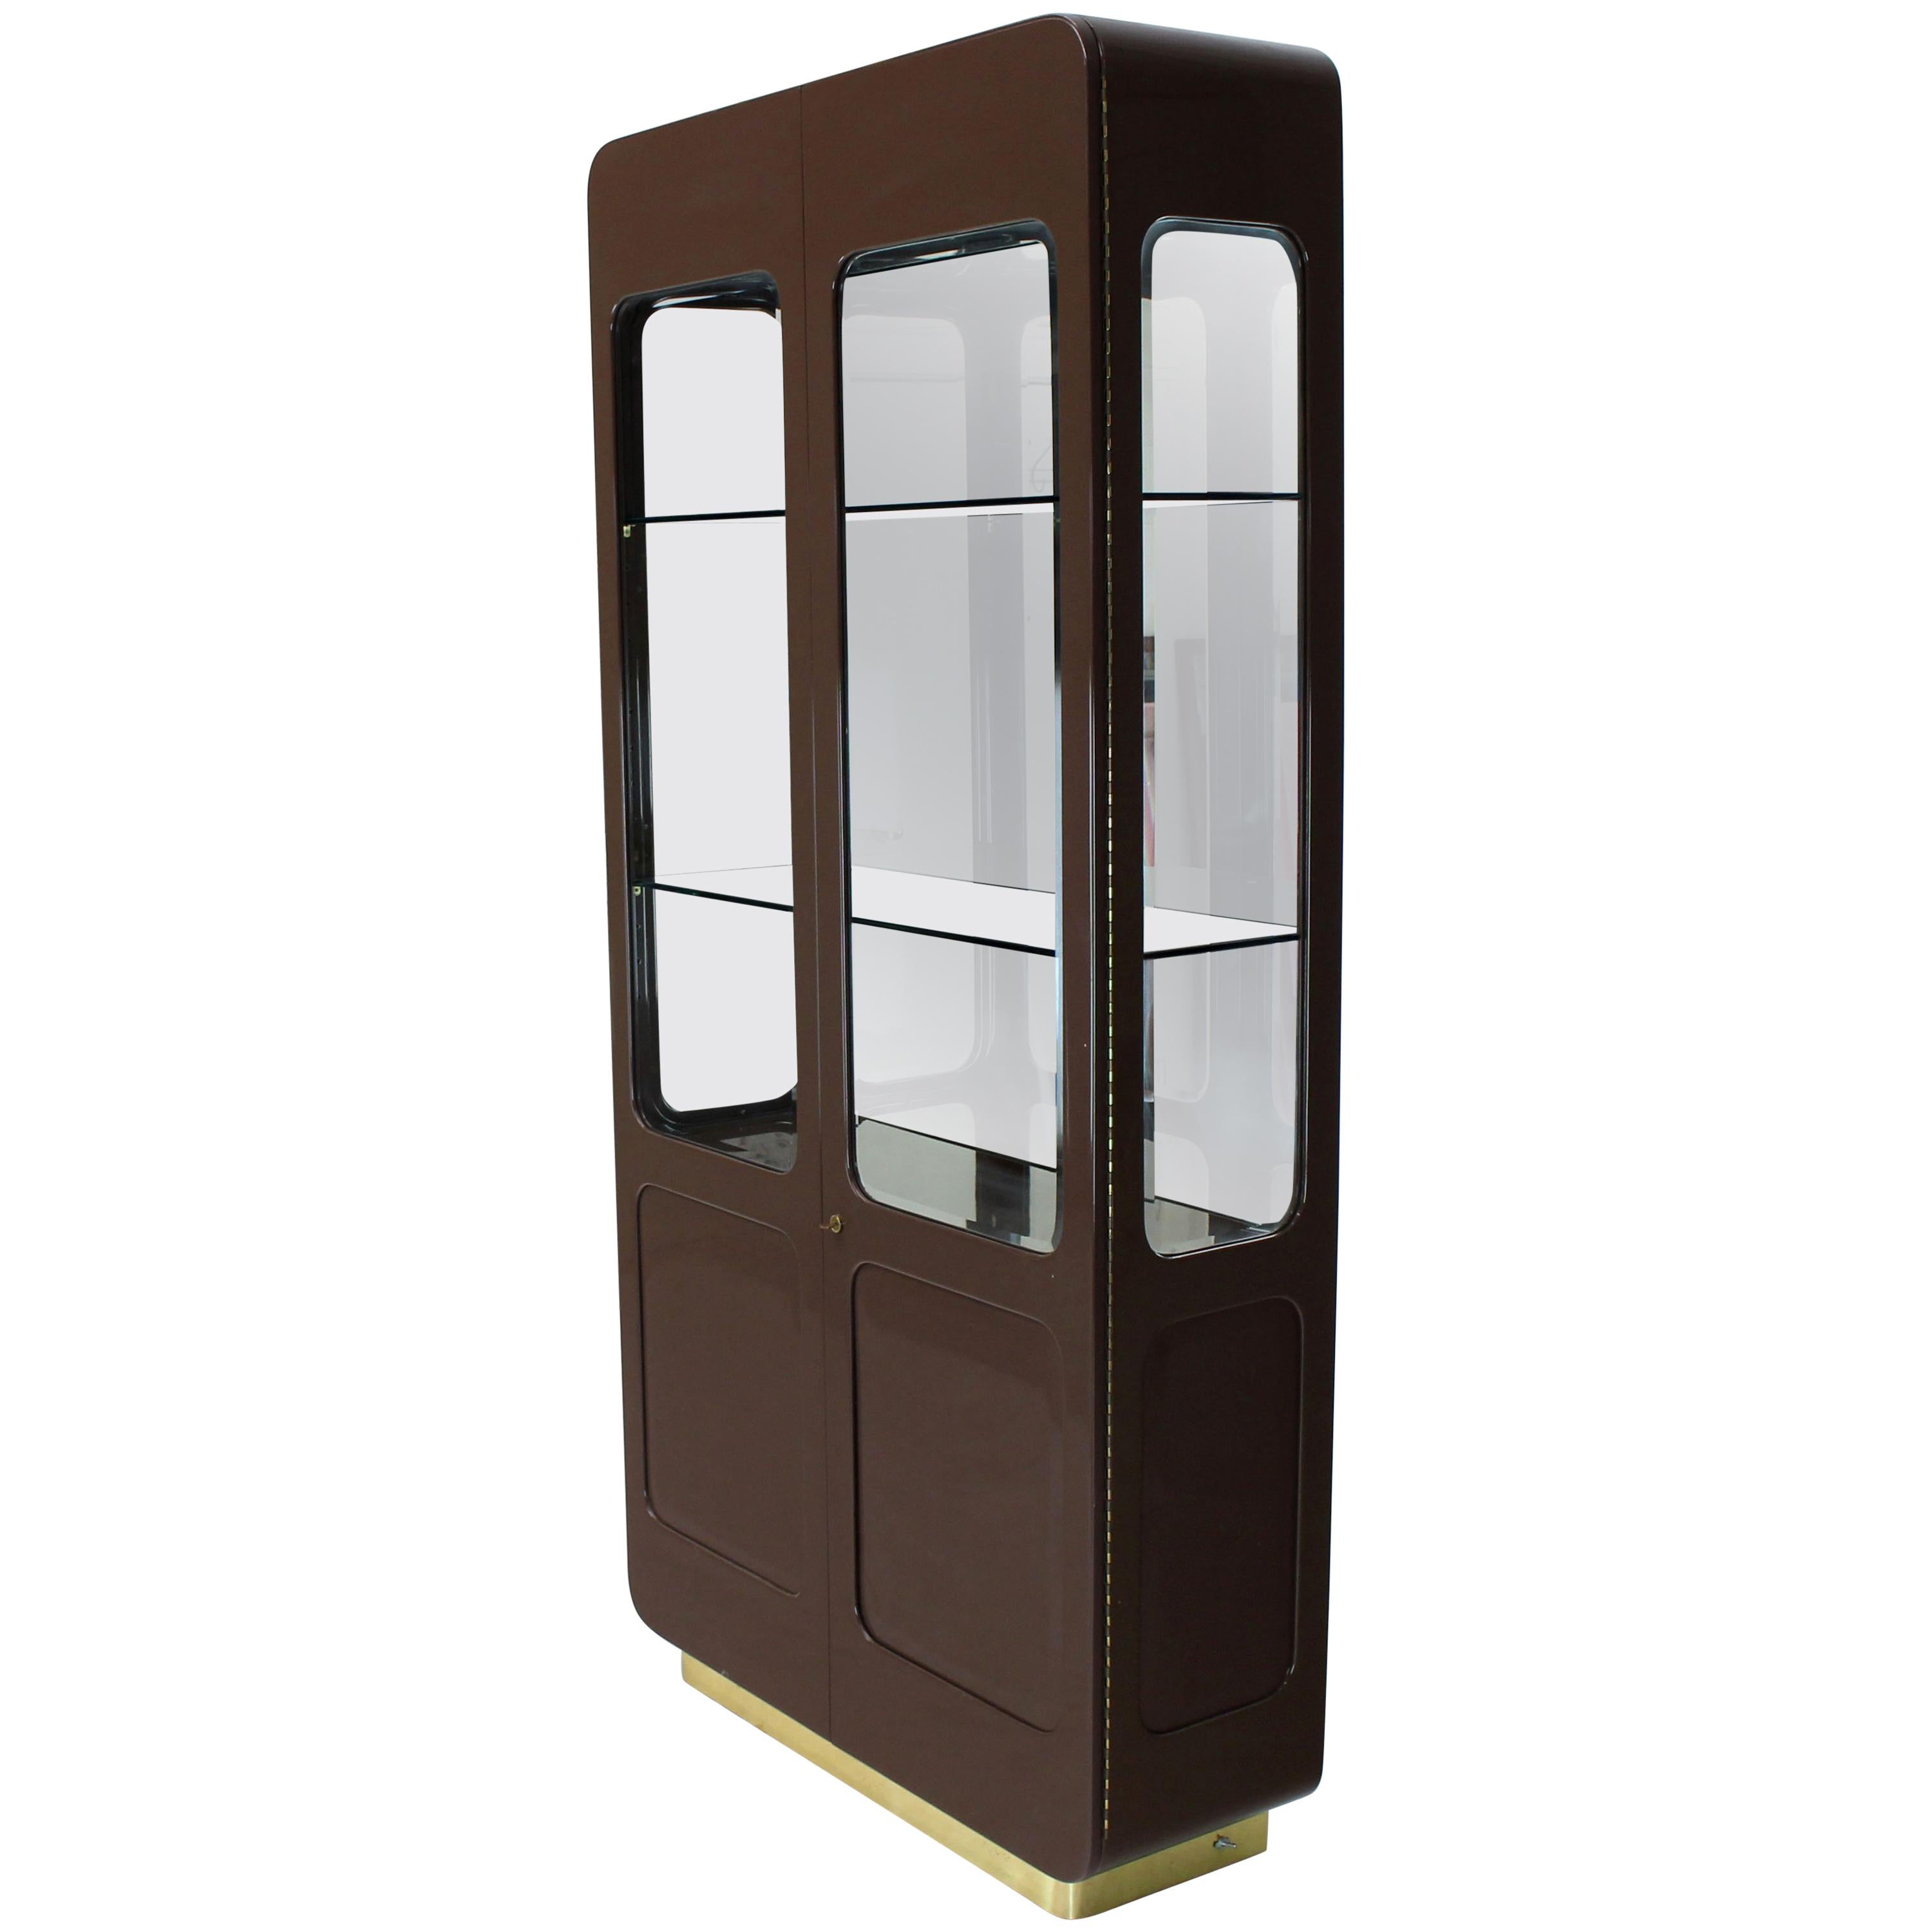 Tall High Gloss Lacquer Finish Rounded Beveled Glass Display Cabinet Wall Unit For Sale